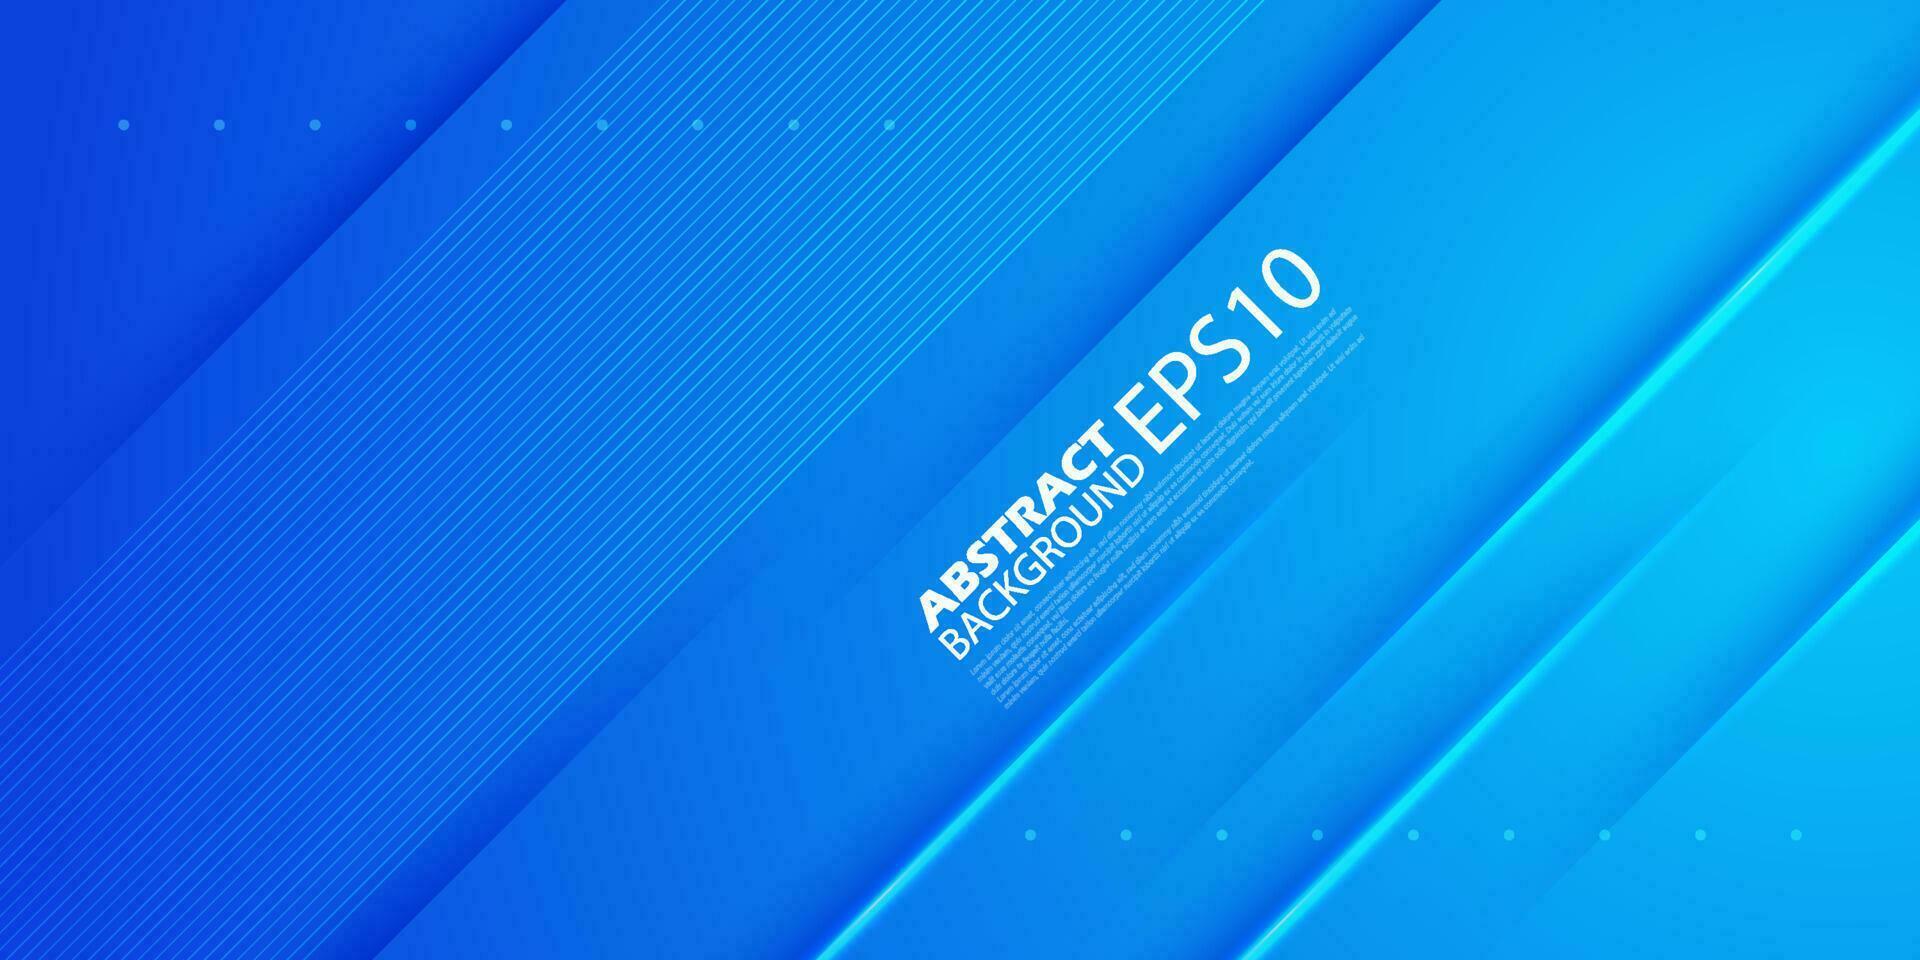 Abstract blue background futuristic graphic. Blue background with shadows. Abstract background texture design, sporty poster, banner blue background. Eps10 Vector